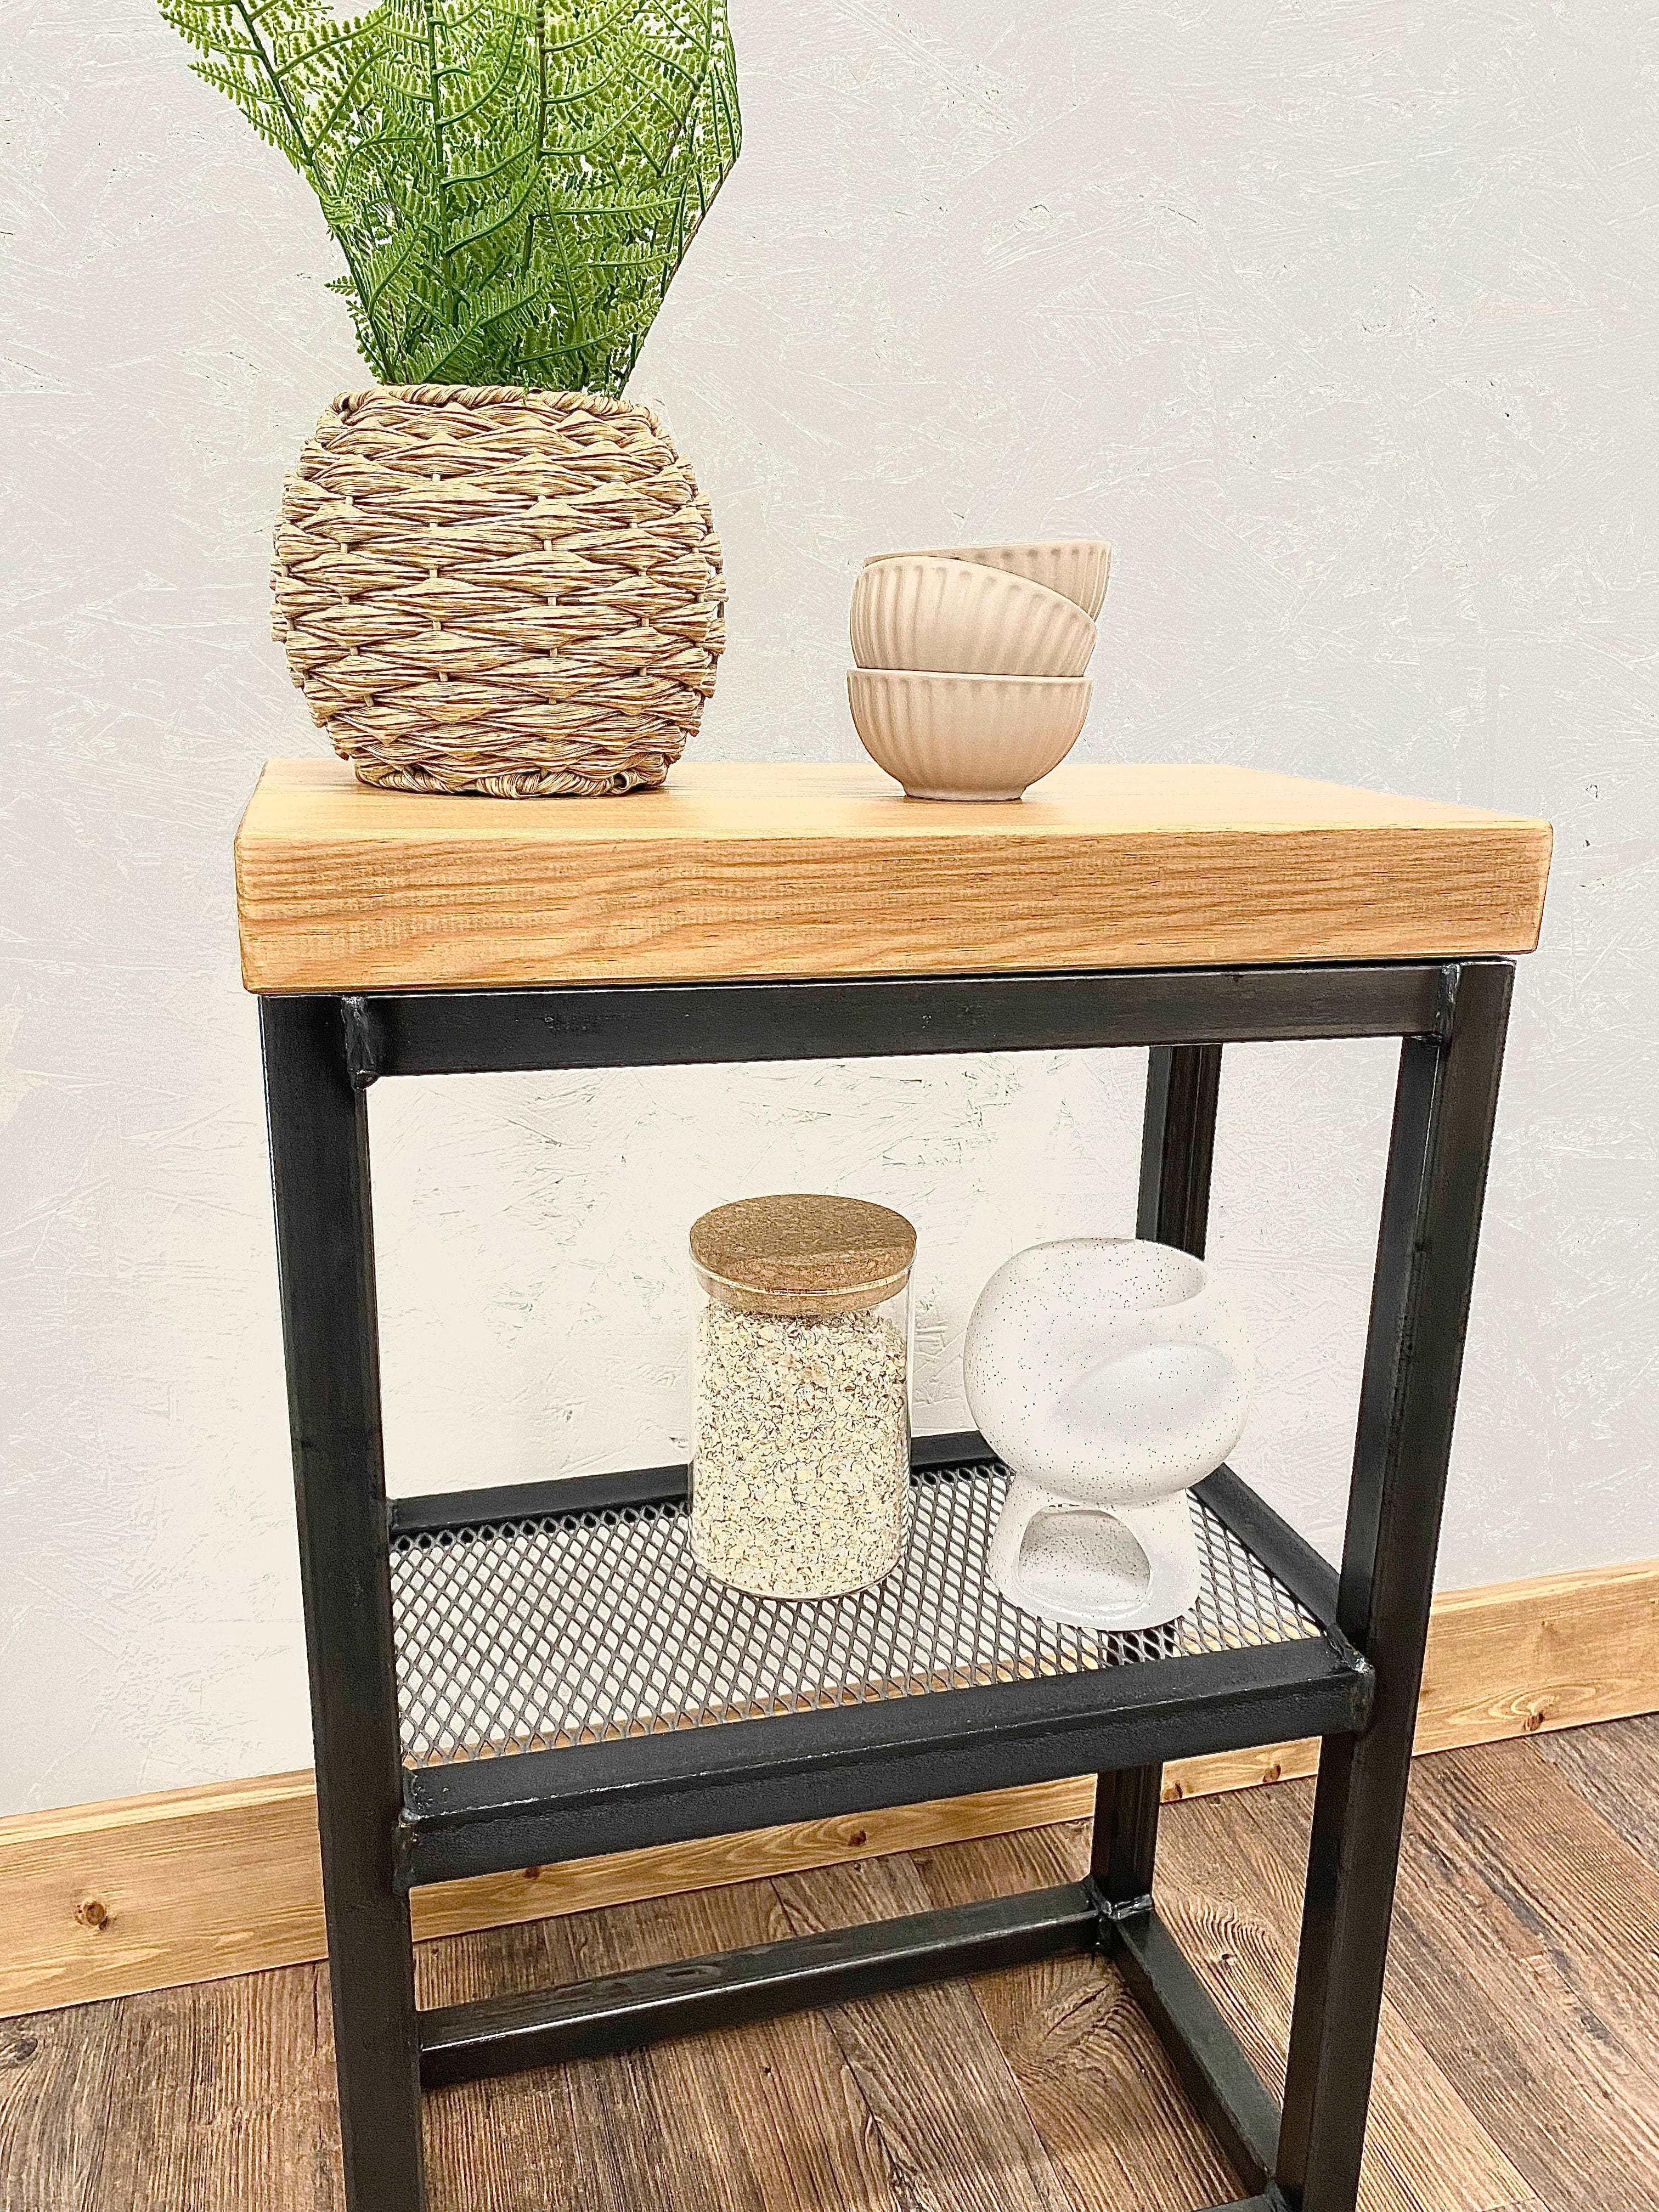 Industrial Side Table with Shelf  RSD Furniture   